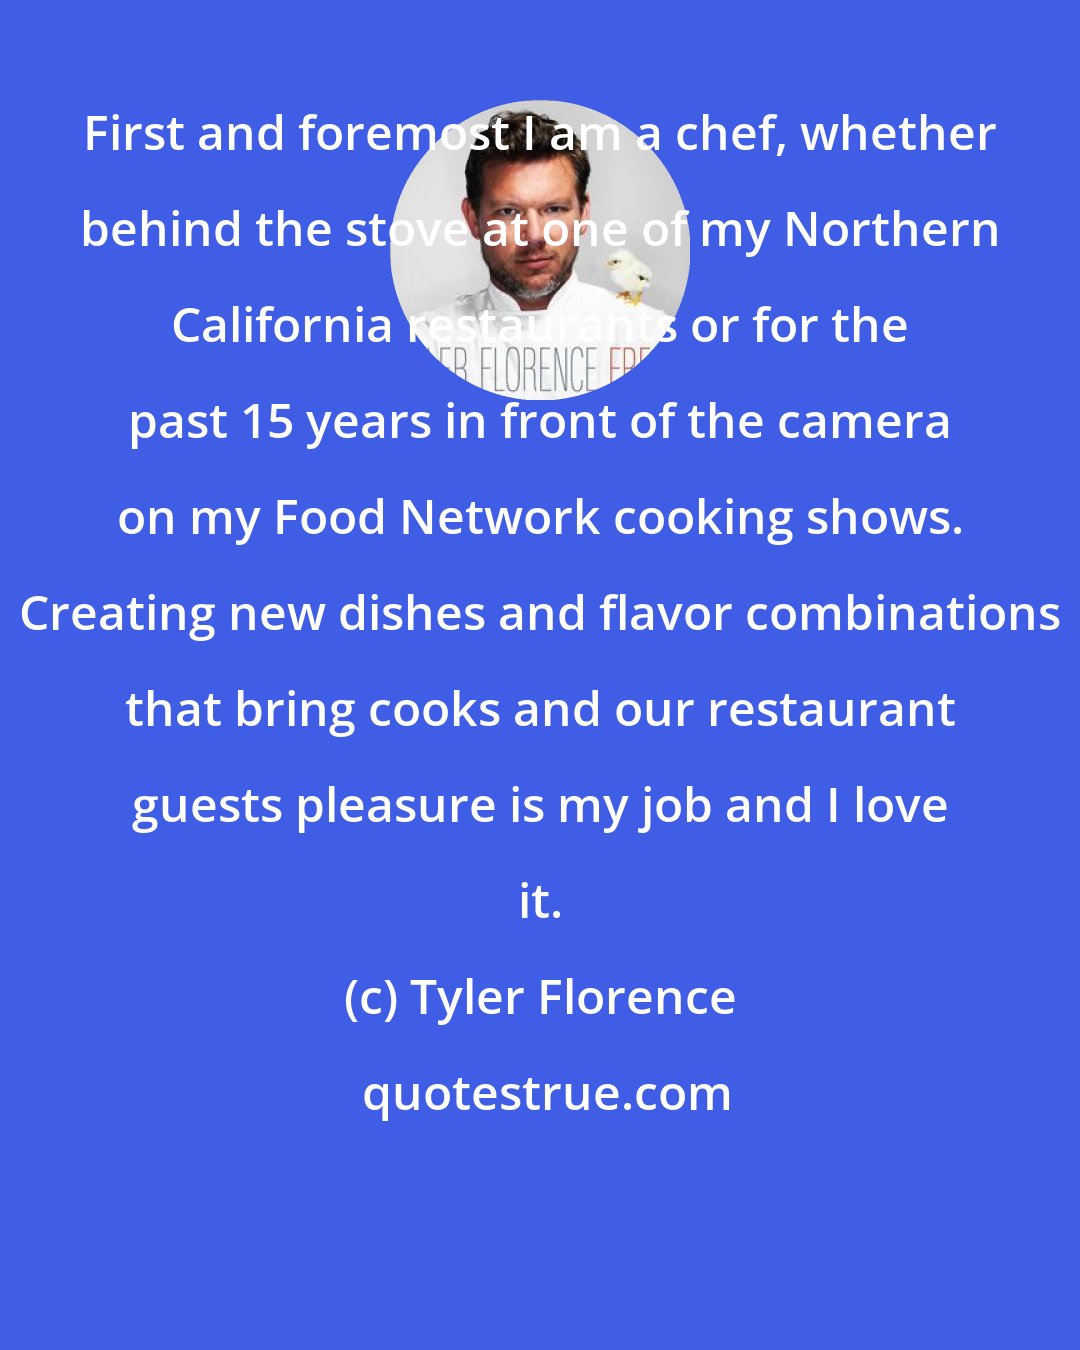 Tyler Florence: First and foremost I am a chef, whether behind the stove at one of my Northern California restaurants or for the past 15 years in front of the camera on my Food Network cooking shows. Creating new dishes and flavor combinations that bring cooks and our restaurant guests pleasure is my job and I love it.